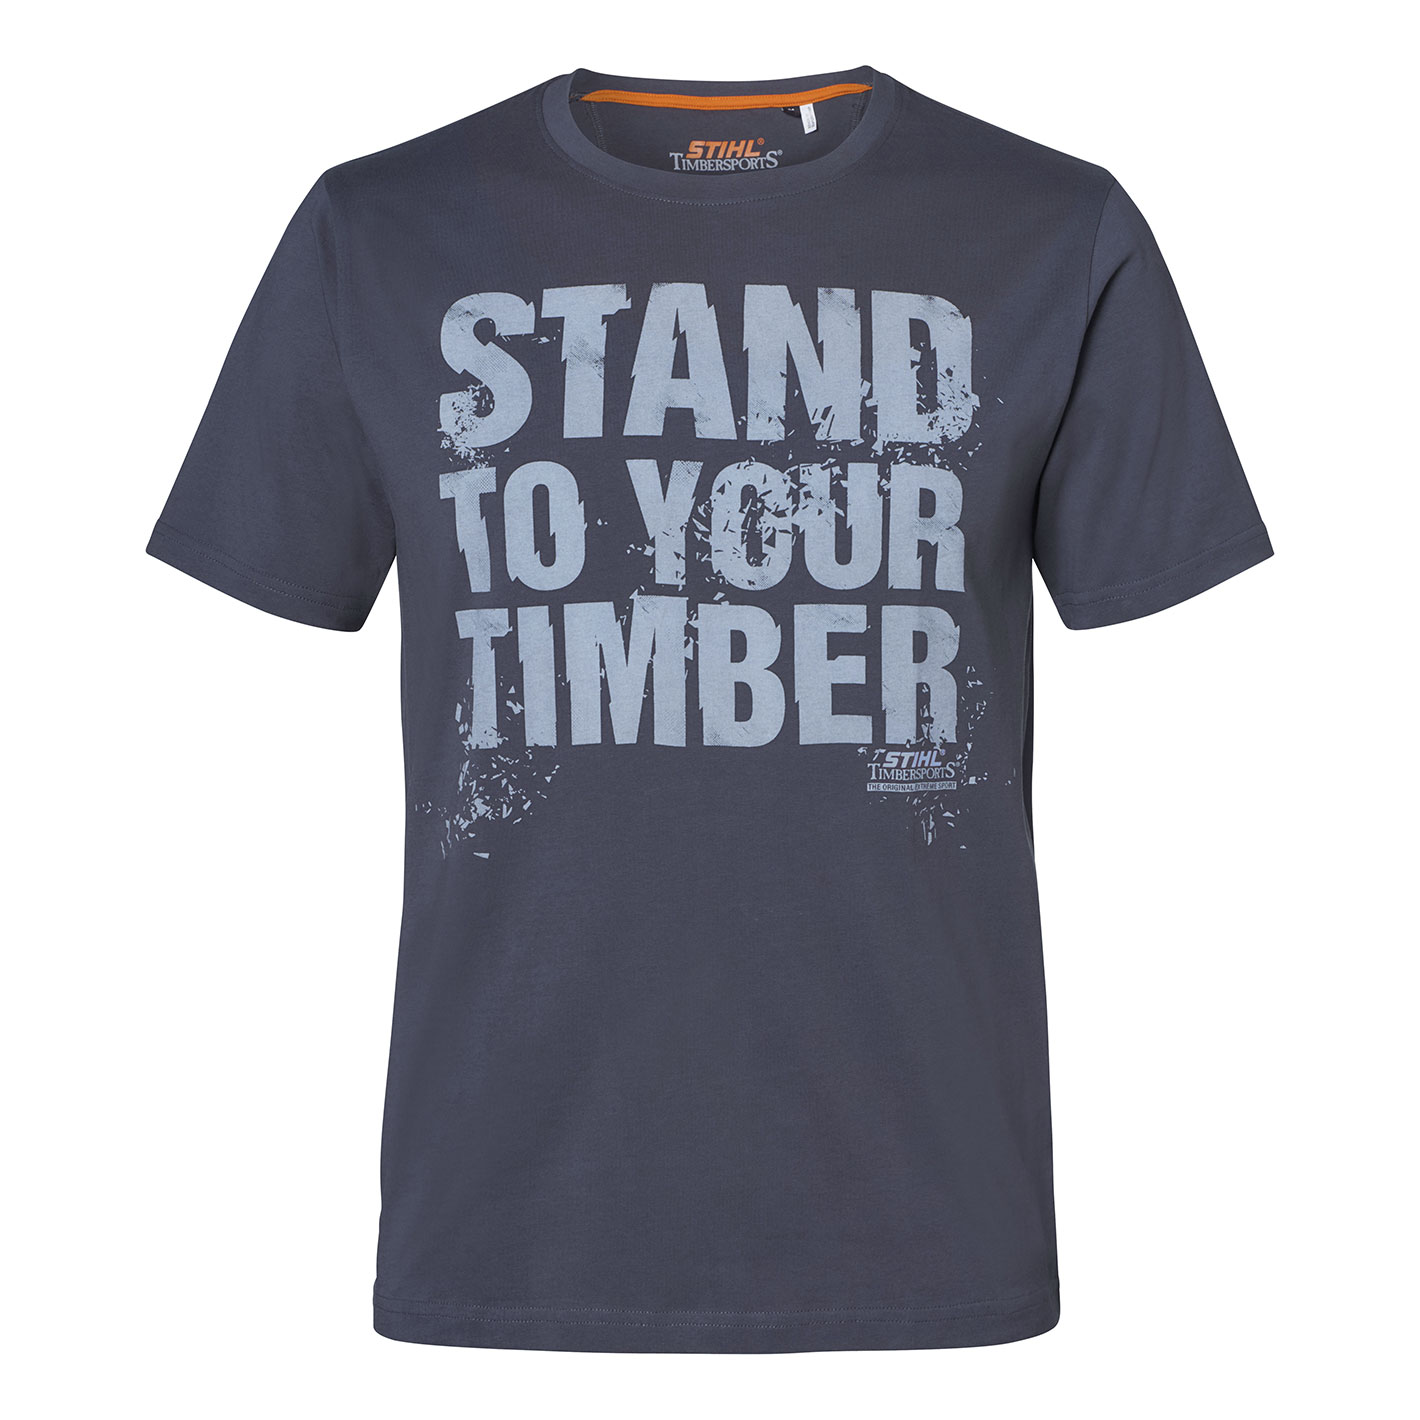 T-Shirt "STAND TO YOUR TIMBER"